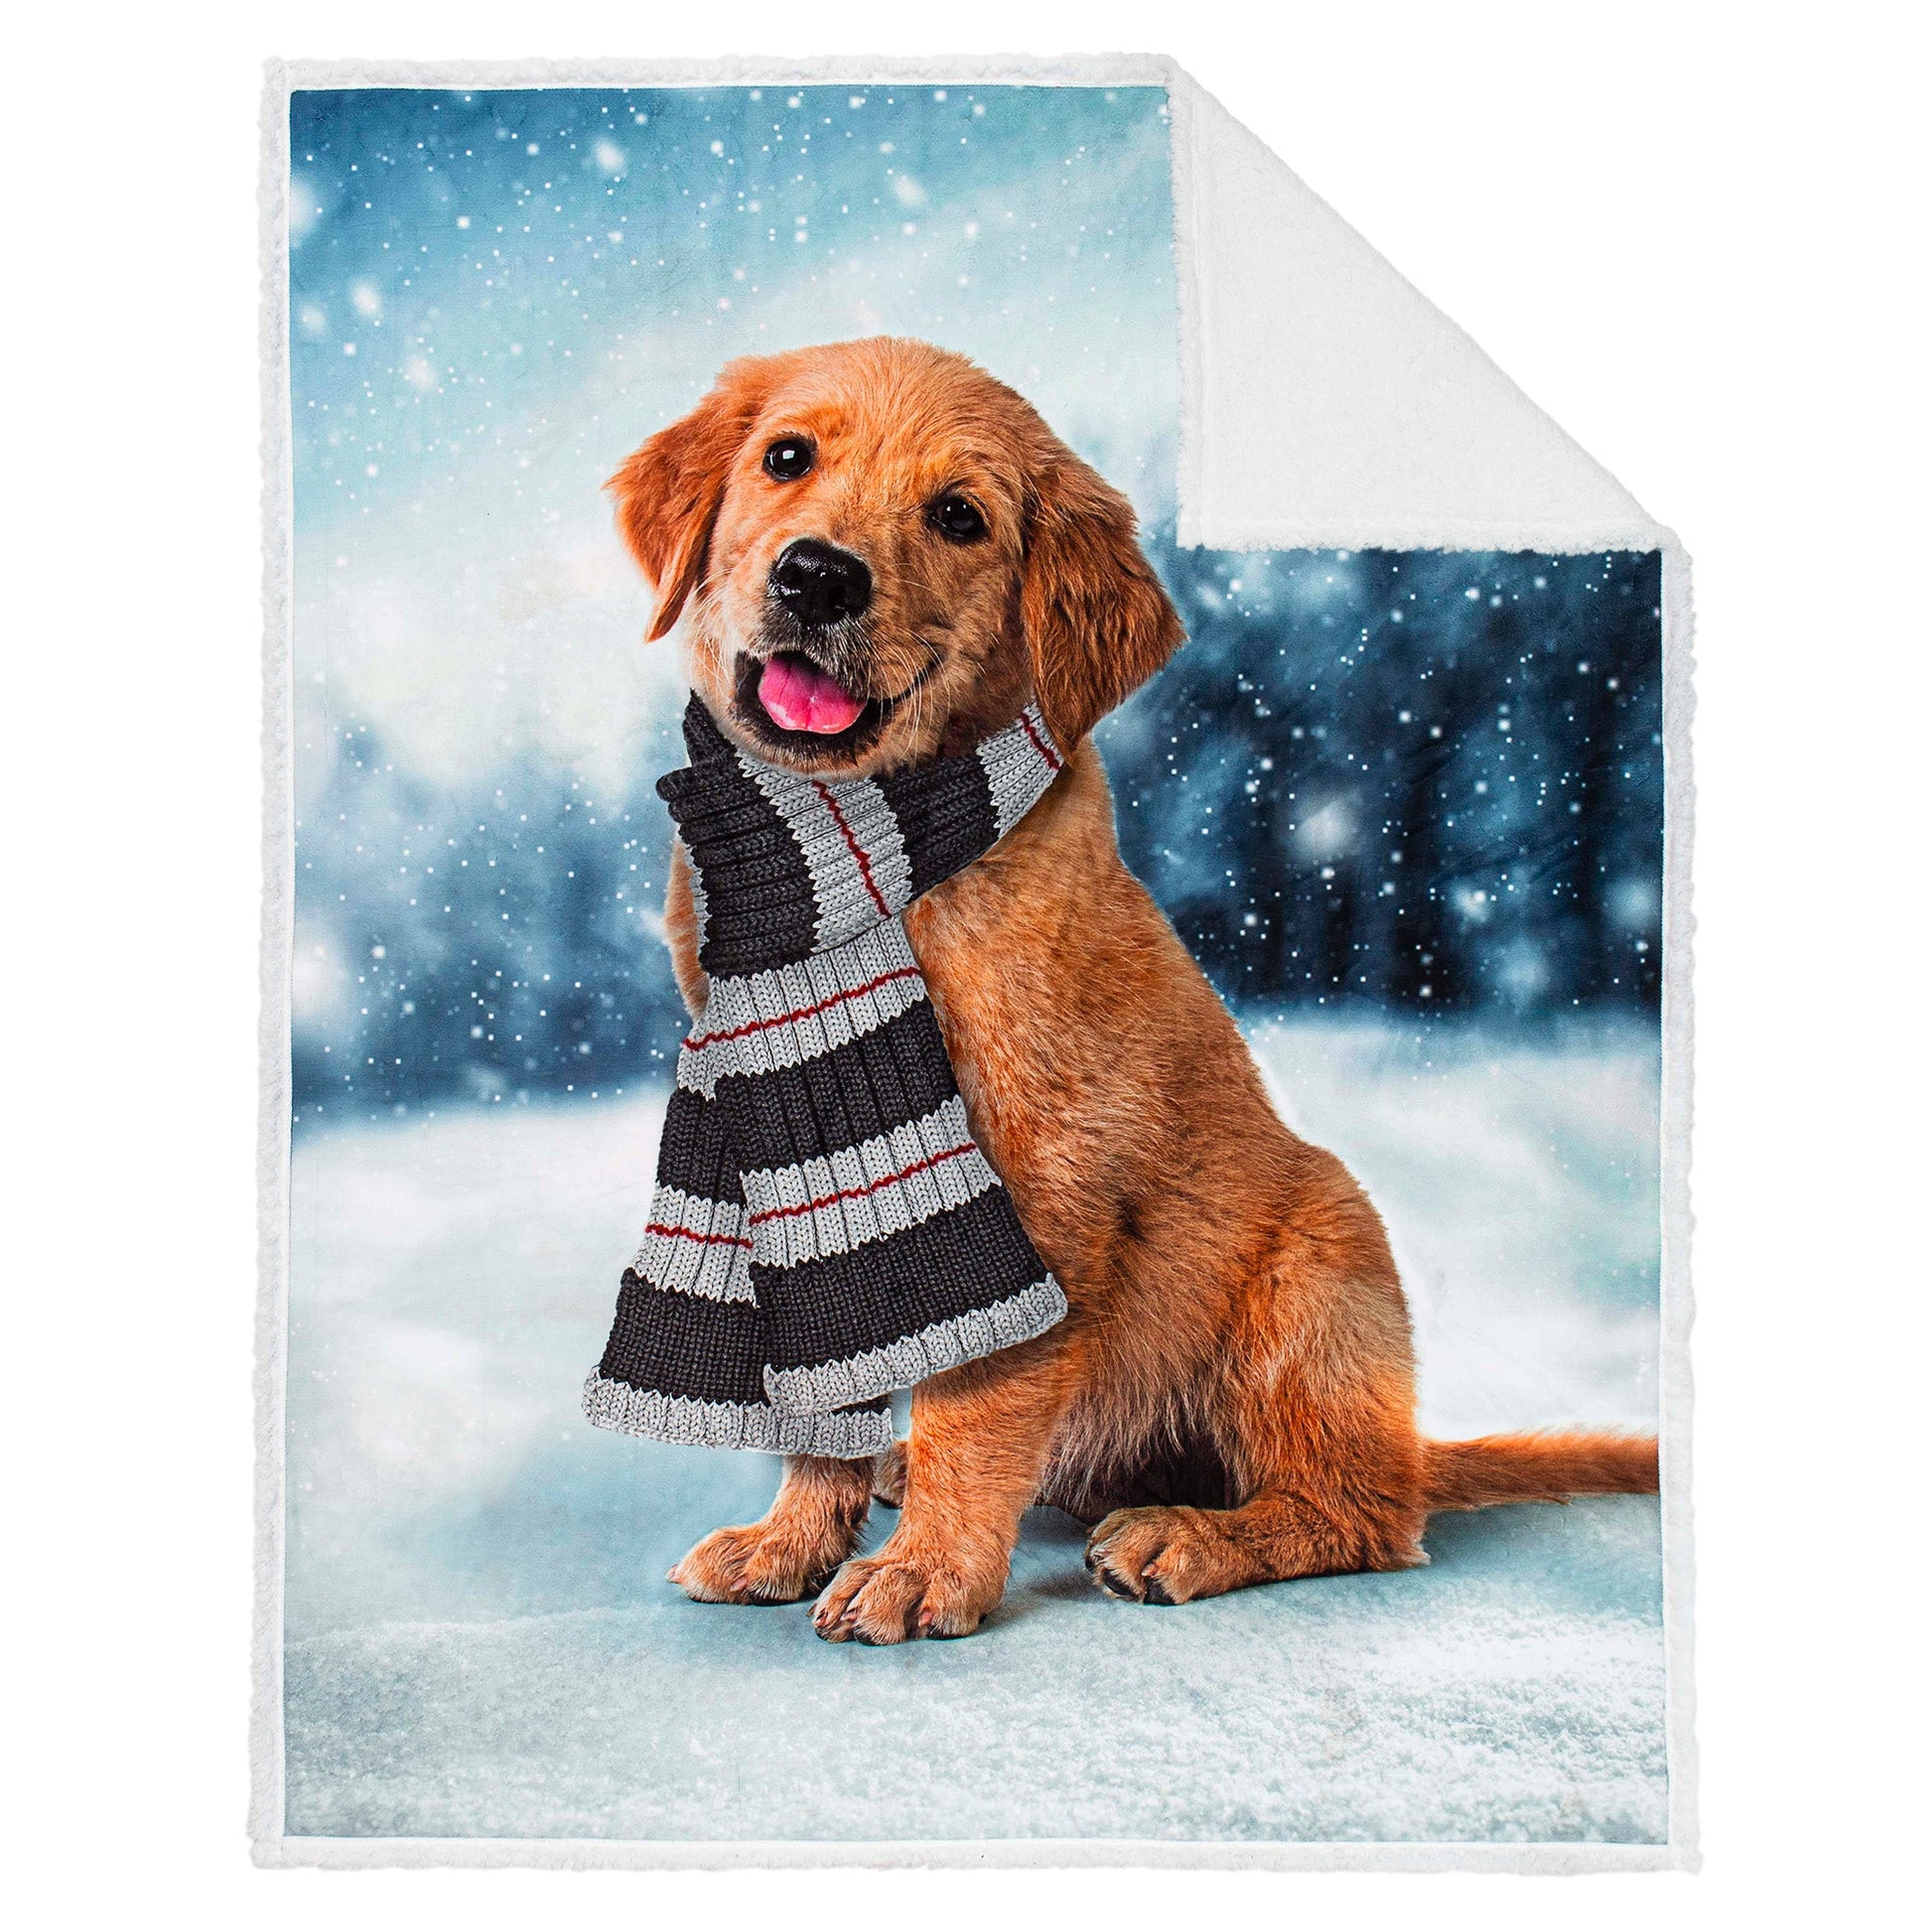 Super Soft Photoreal Reversible Blanket Throw Sherpa Home Decor Bedding 48X60 Scarf Puppy - DecoElegance - Blanket Throw Home Bedding